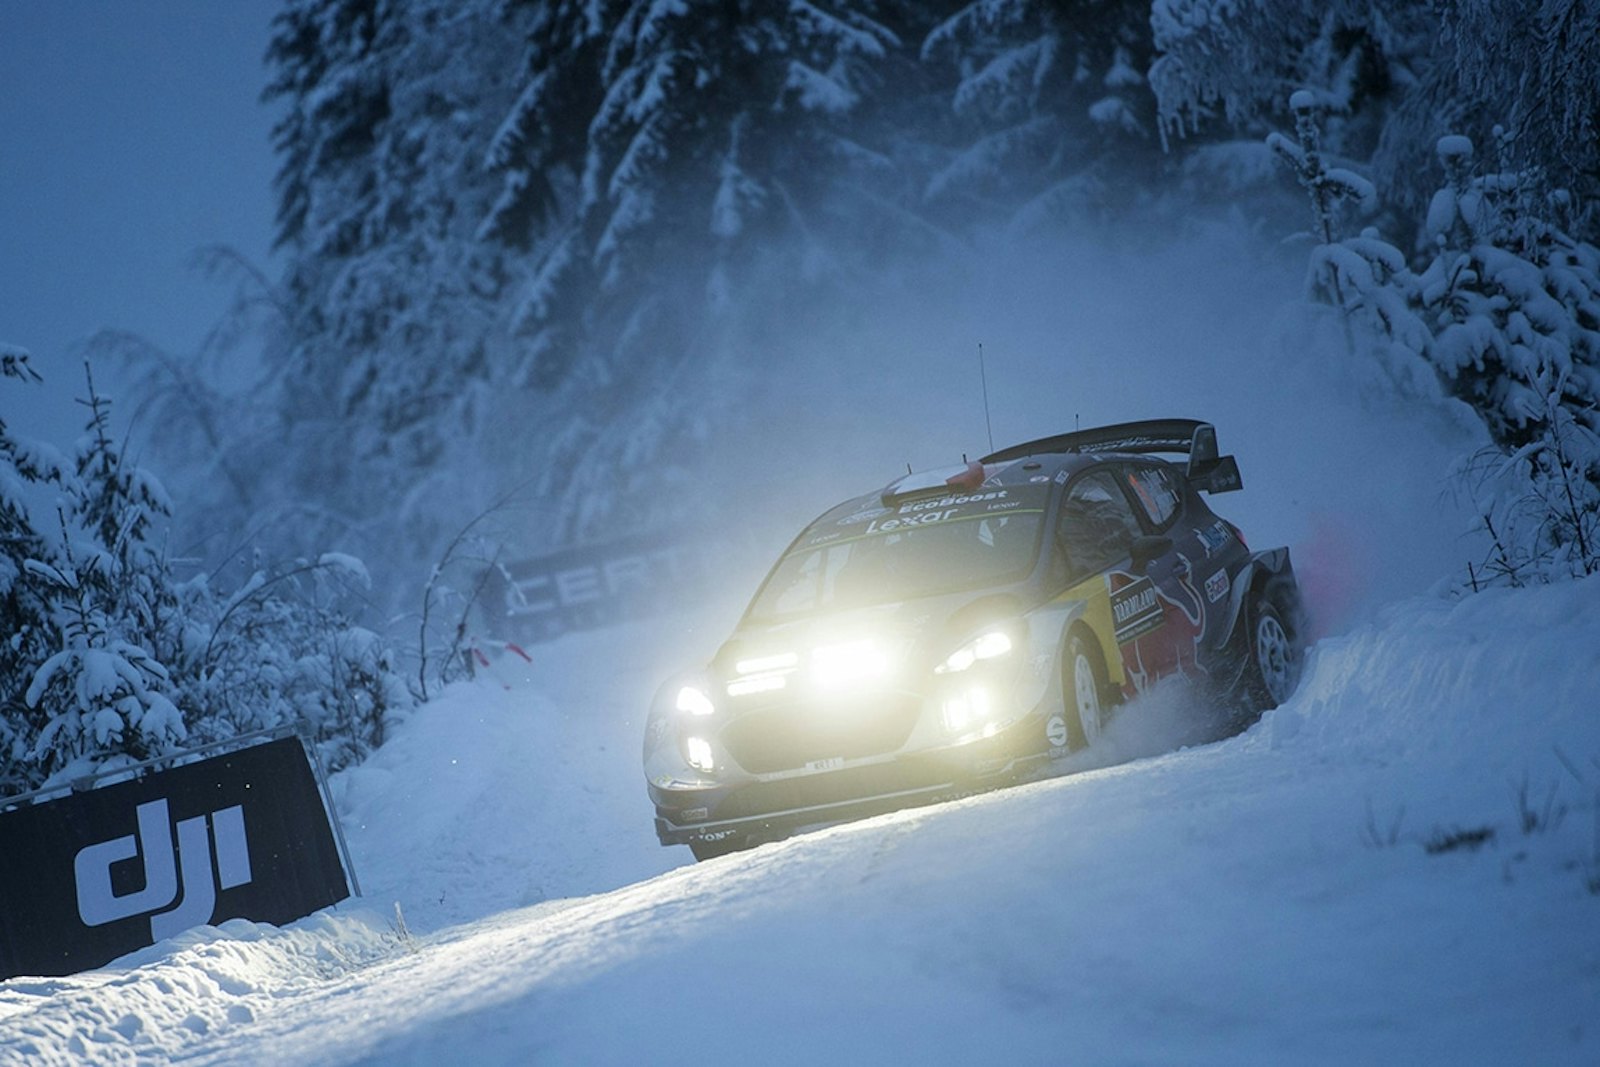 Sebastien Ogier (FRA) competes during the FIA World Rally Championship 2017 in Torsby, Sweden on February 10, 2017 // Jaanus Ree/Red Bull Content Pool // P-20170210-02842 // Usage for editorial use only // Please go to www.redbullcontentpool.com for further information. //